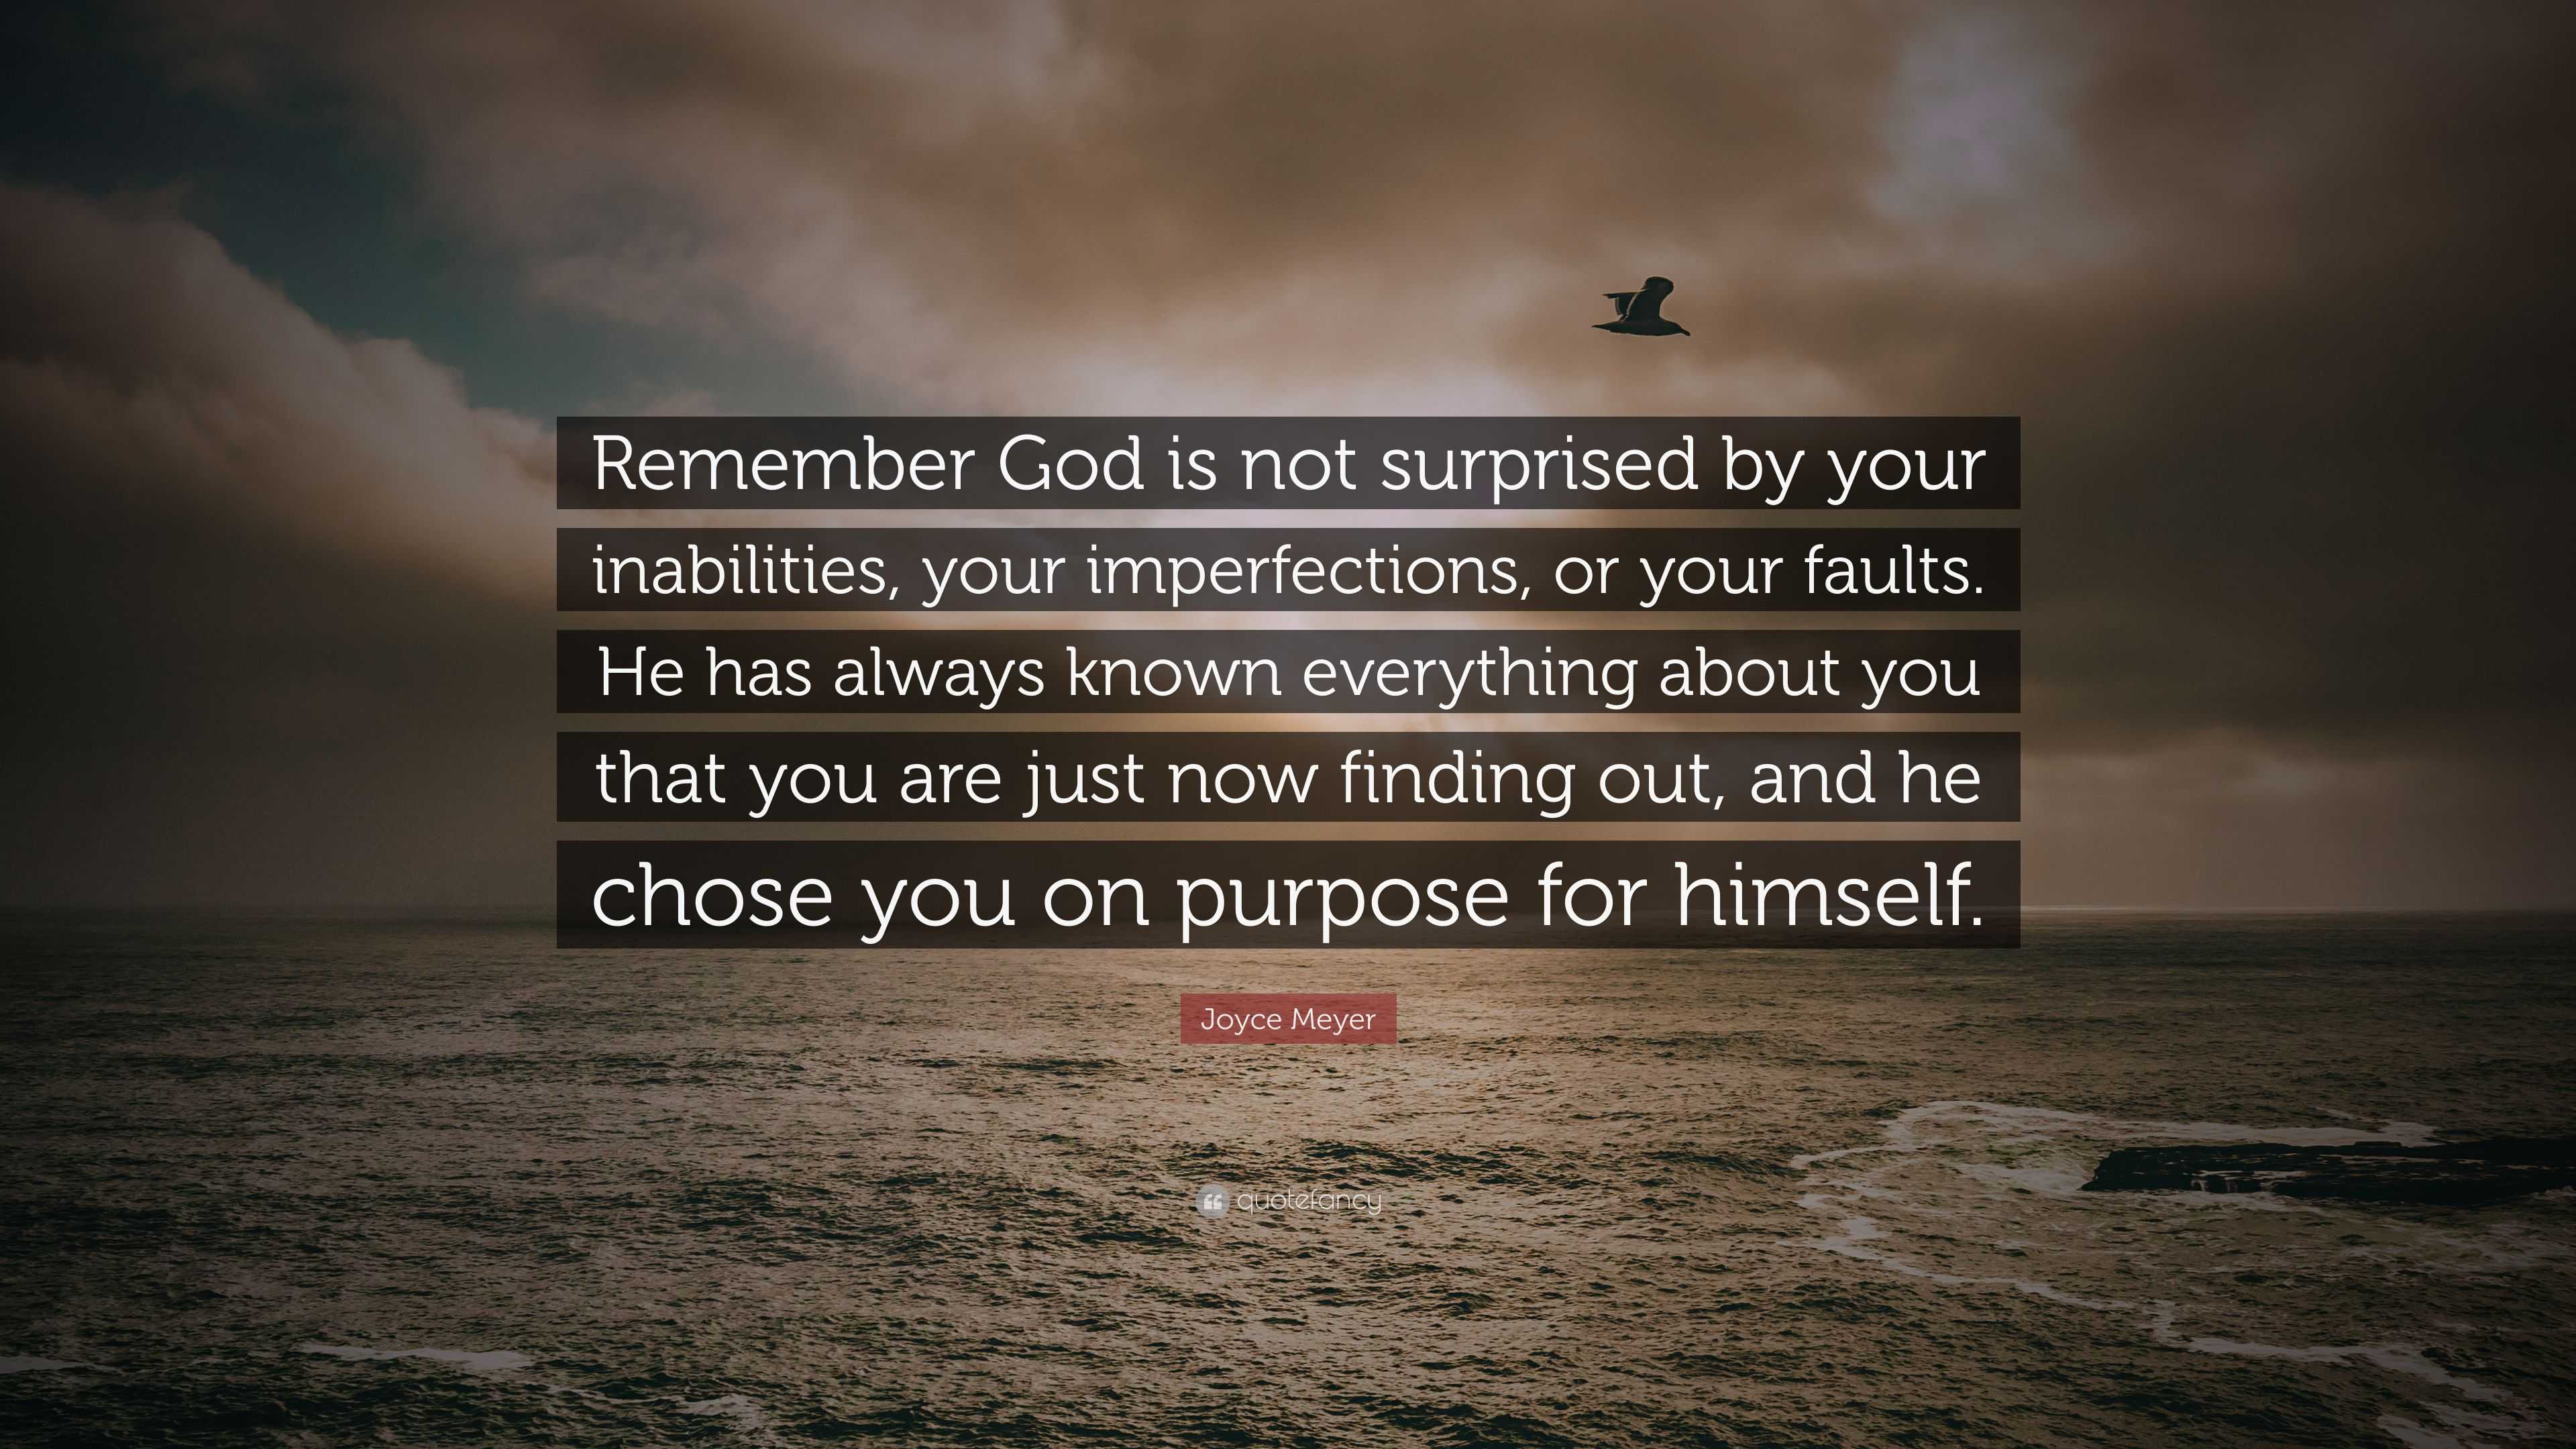 25+ Imperfect Christian Quotes And Sayings To Encourage You This Year Quote 19